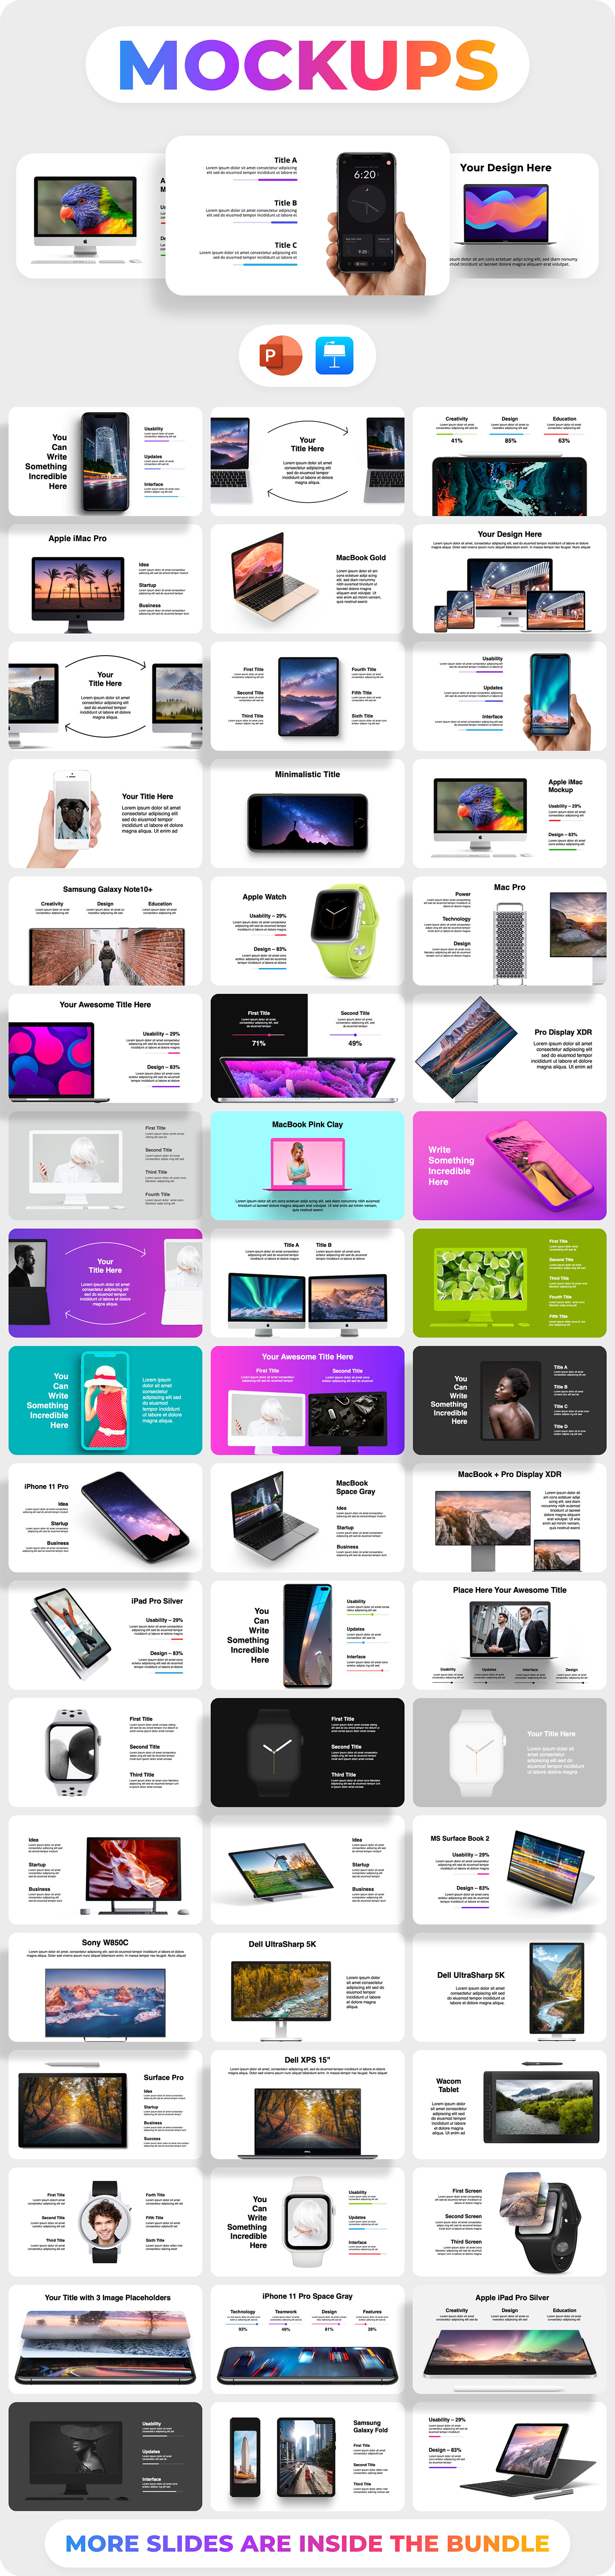 Education Powerpoint infographic slides canva Keynote pitch deck templates infographics infographic design